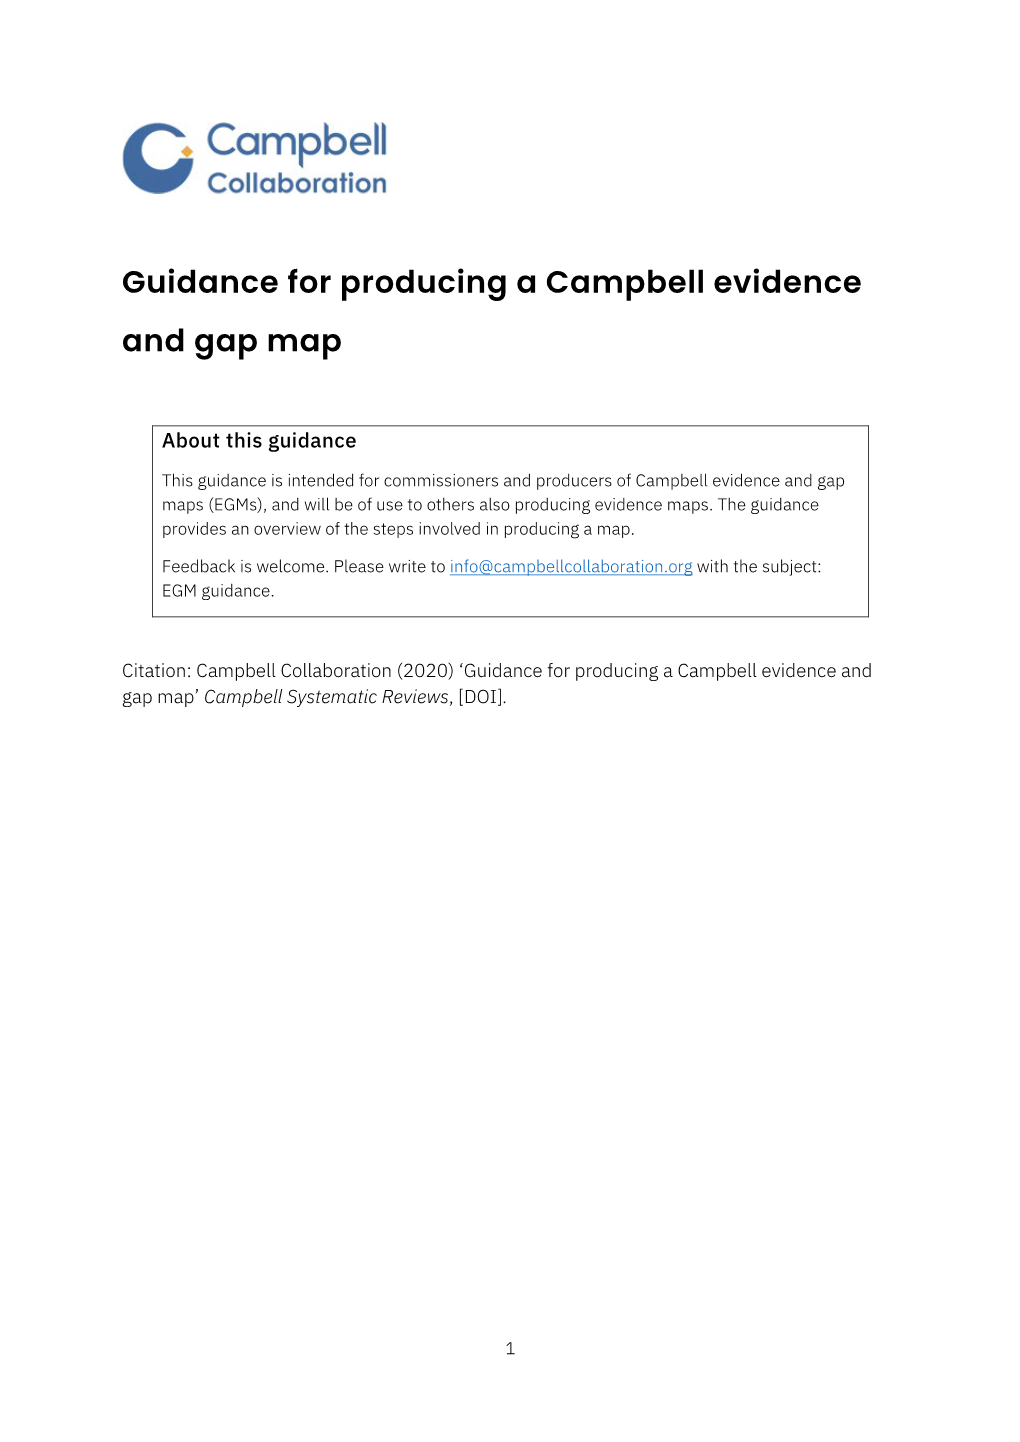 Guidance for Producing a Campbell Evidence and Gap Map